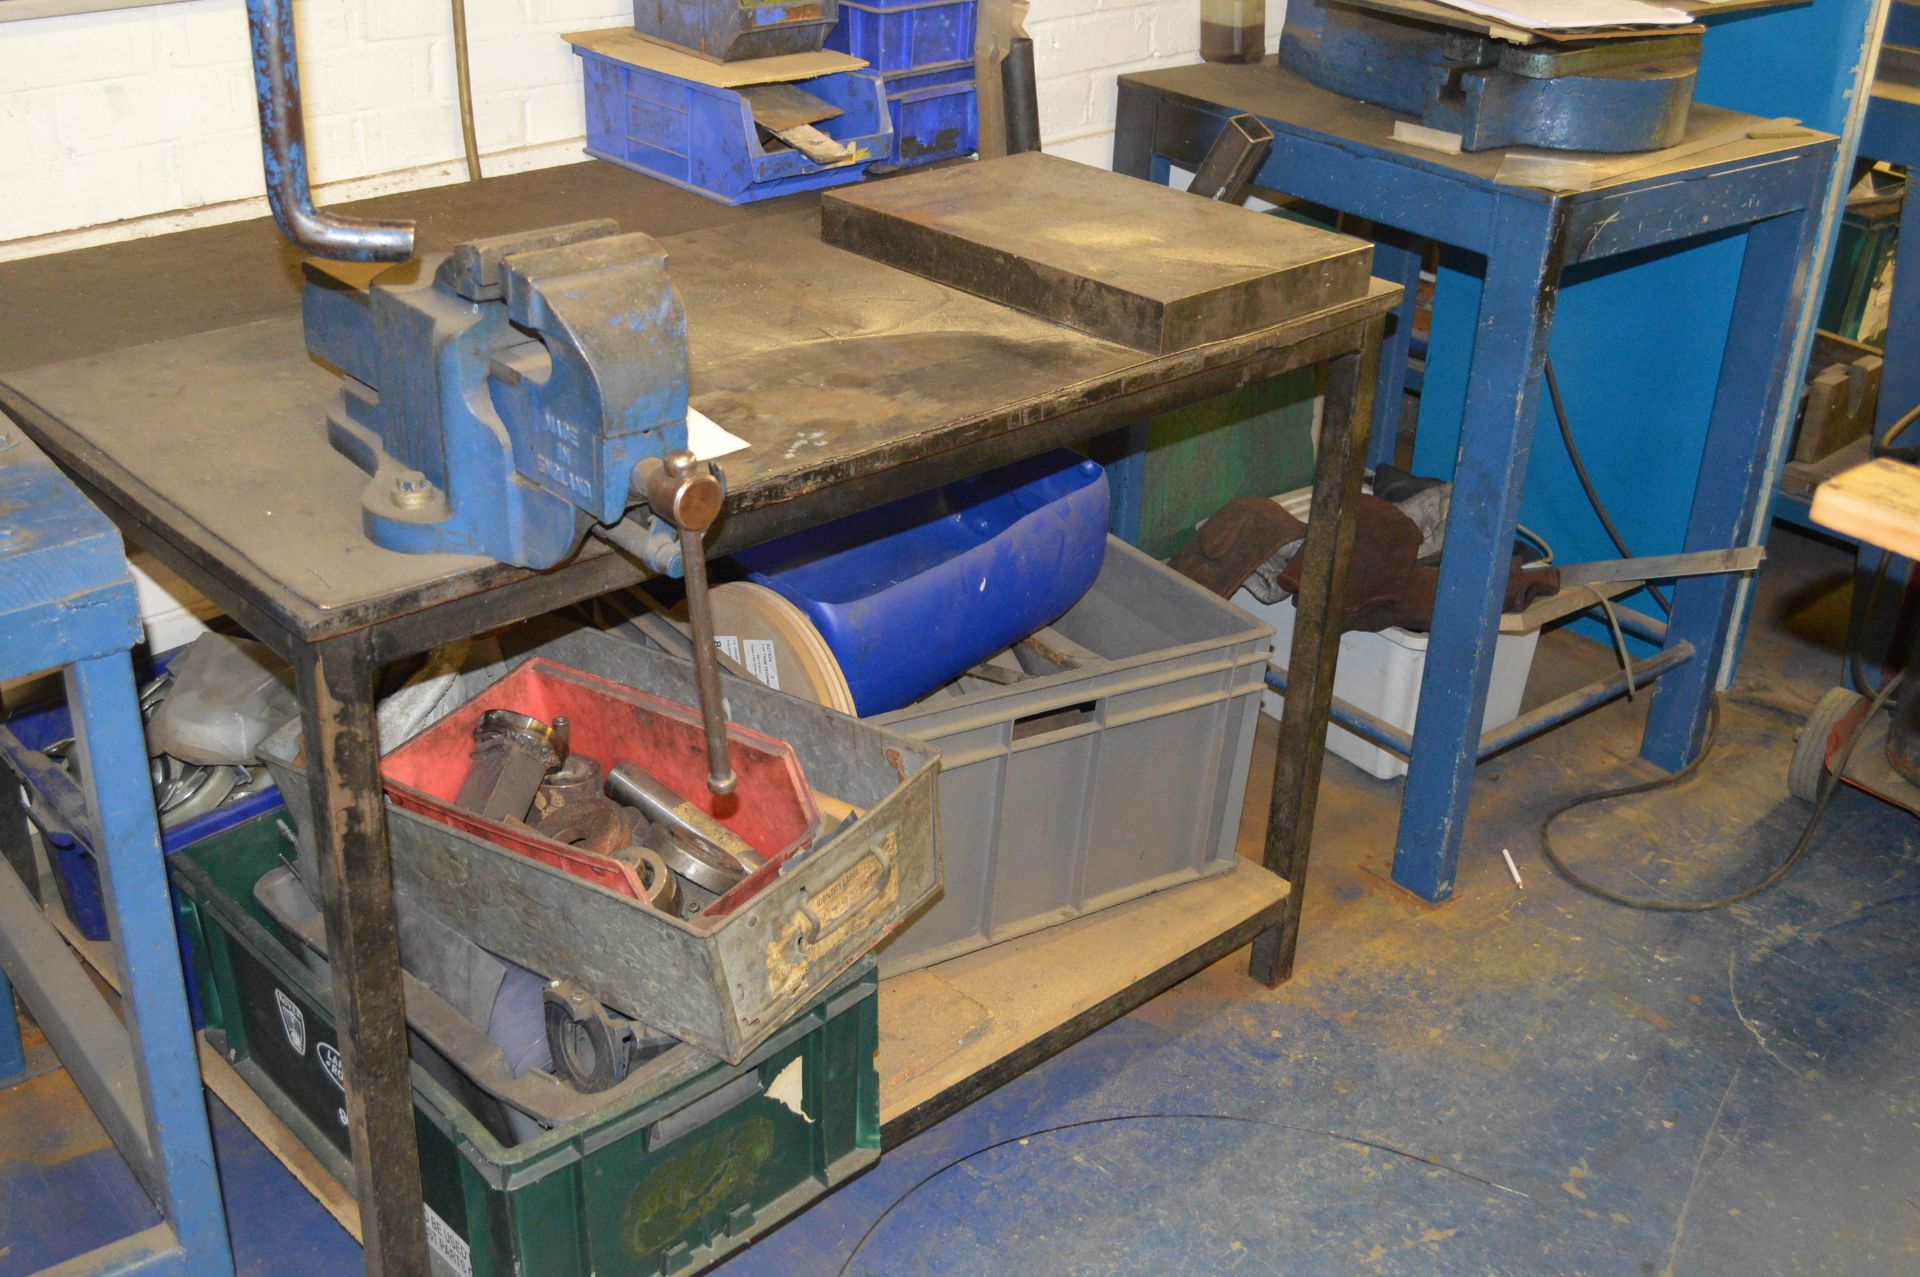 Make Unknown Welded Mild Steel Work Bench with Vice (4ft x 3ft) - Image 2 of 5